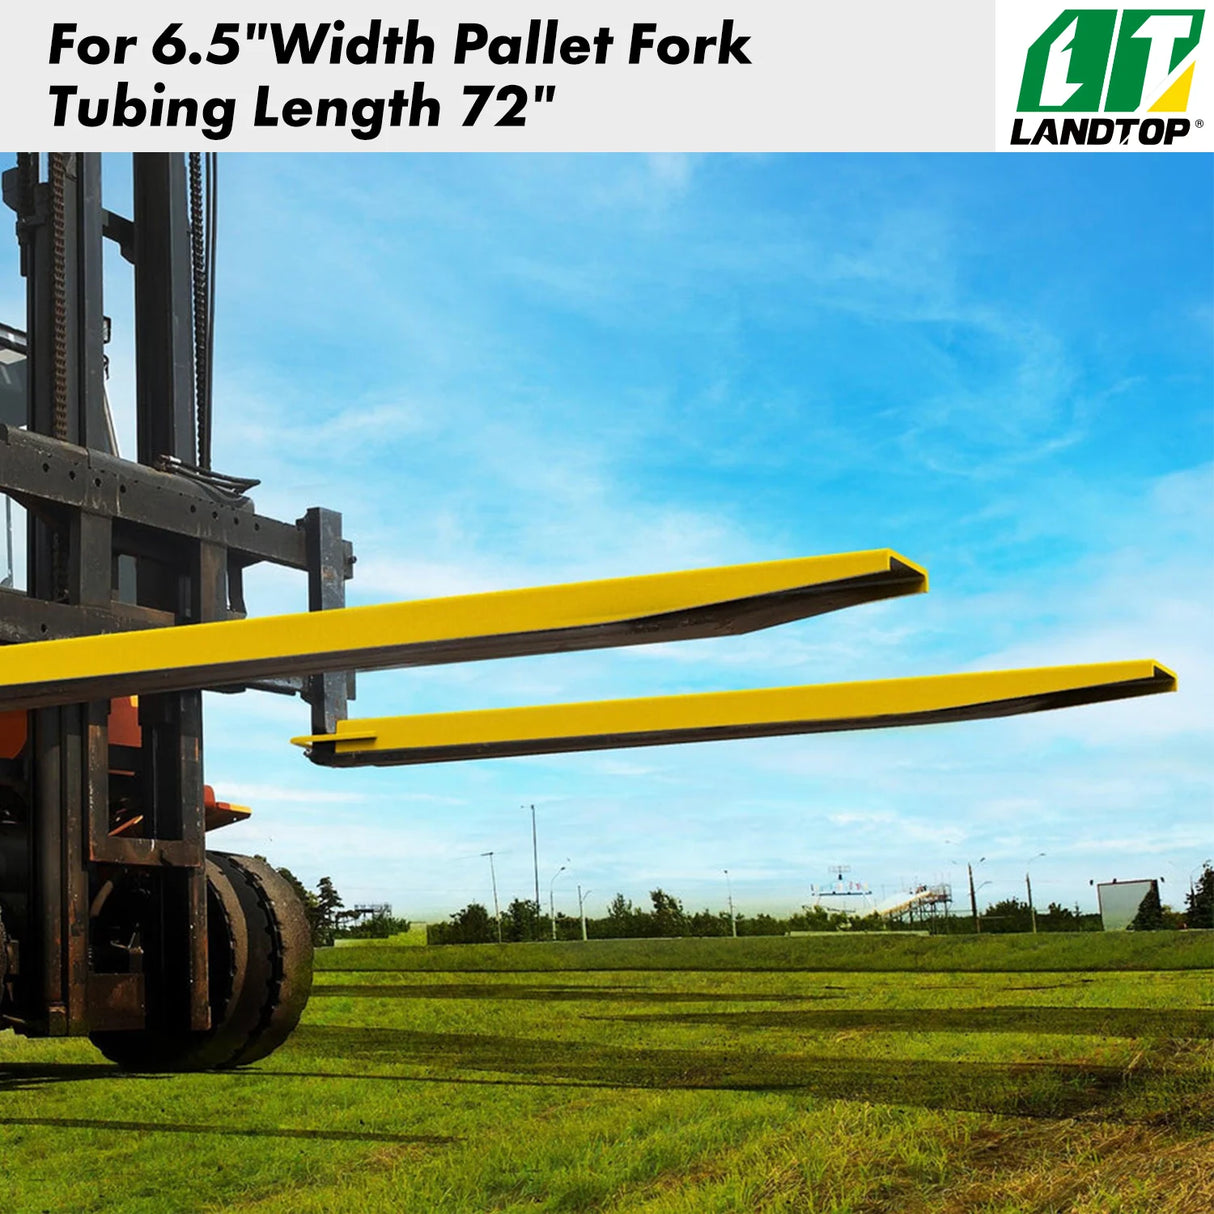 Pallet Forks Extensions 72 Inch Length,Heavy Duty for Forklift,Forklift Extensions 6.5 Inch Width Tractor Skid Steer,Loader Bucket attachments Accessories,Yellow